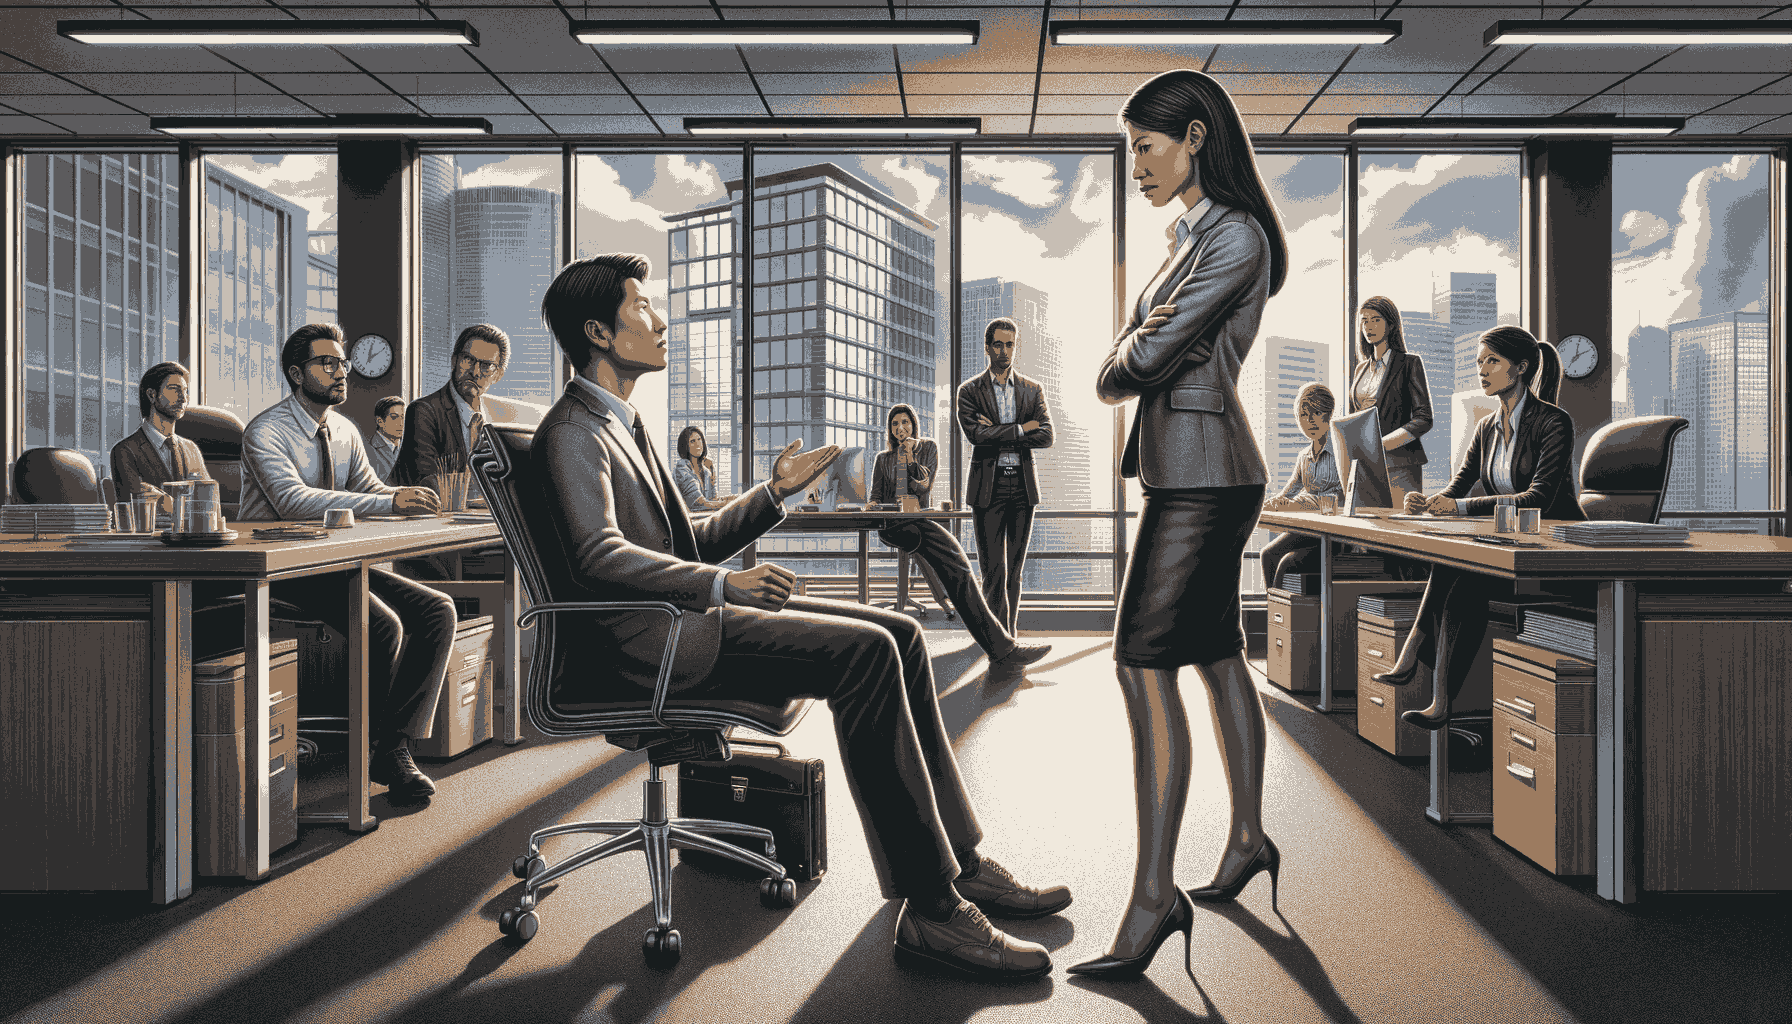 a corporate office scene where a person is dealing with condescending behavior. In this scena